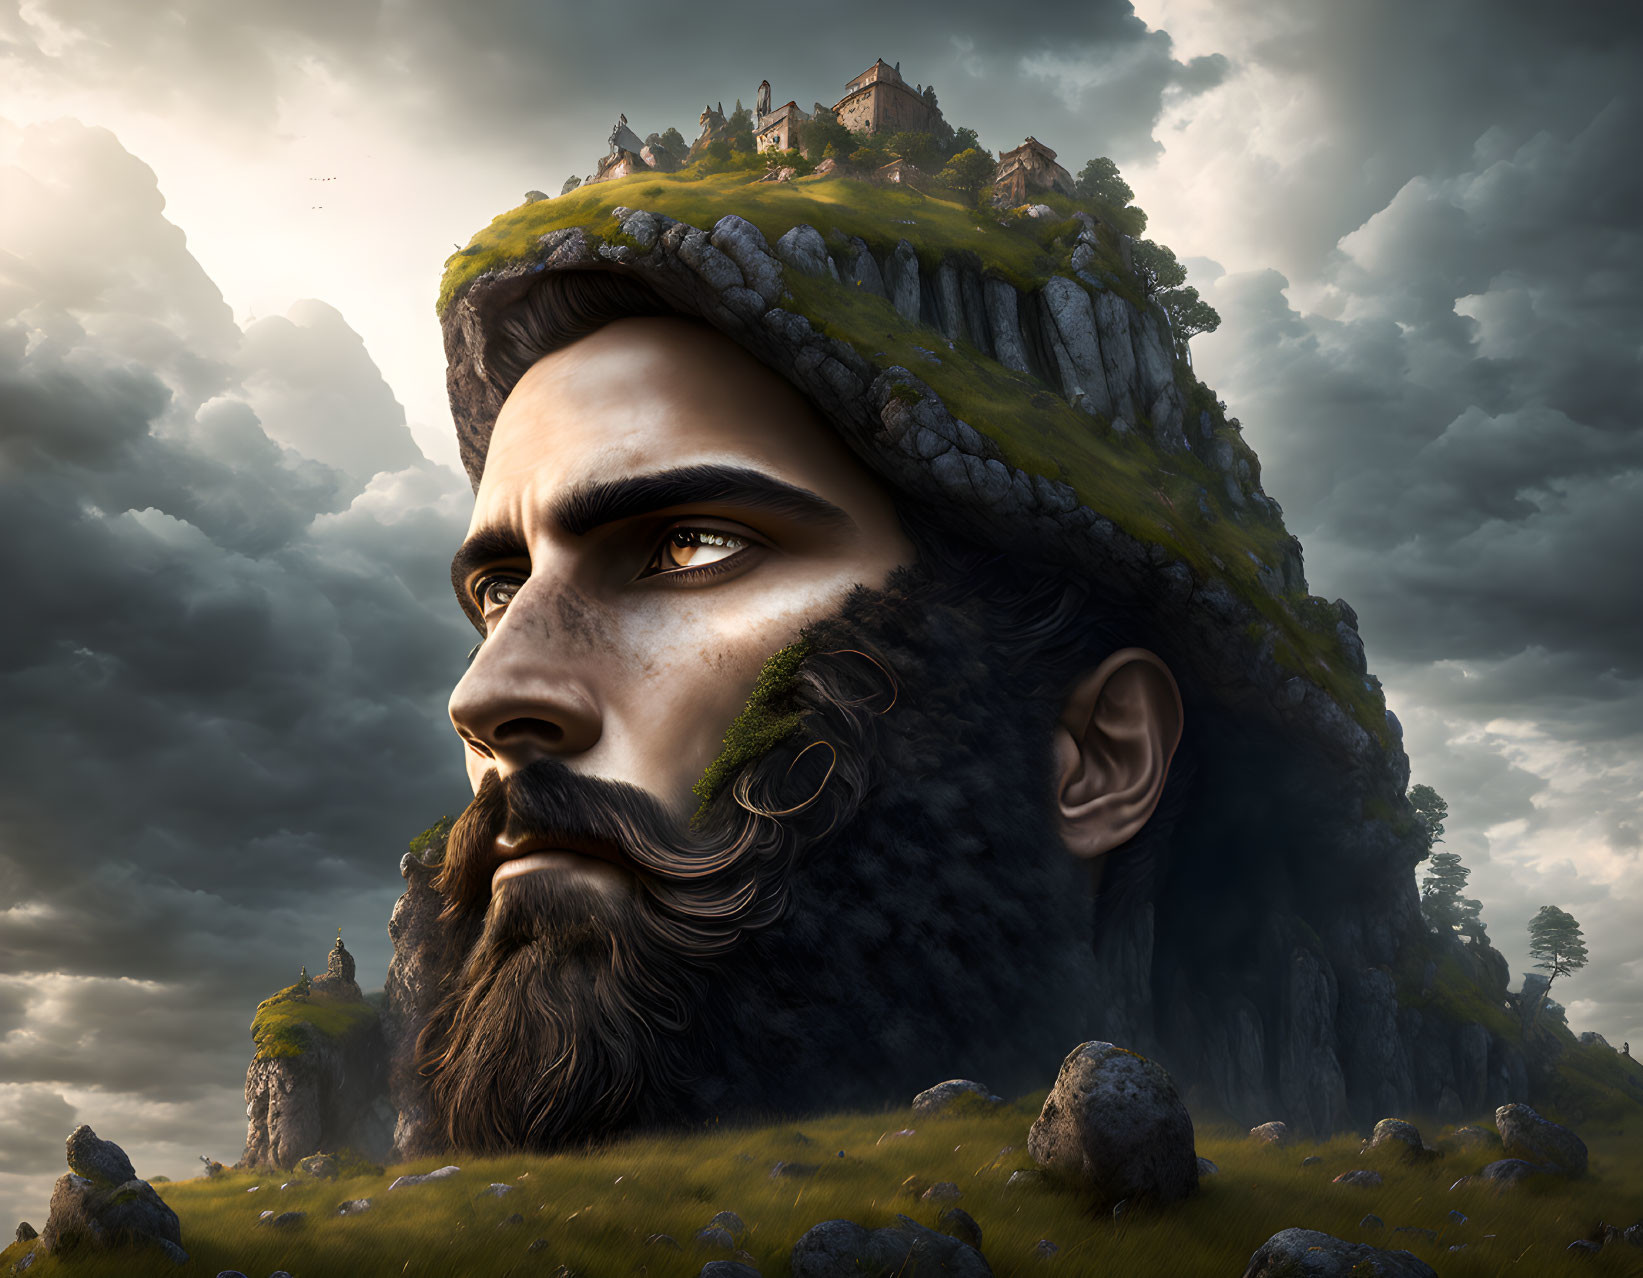 Man's Face Merging with Landscape: Castle on Head